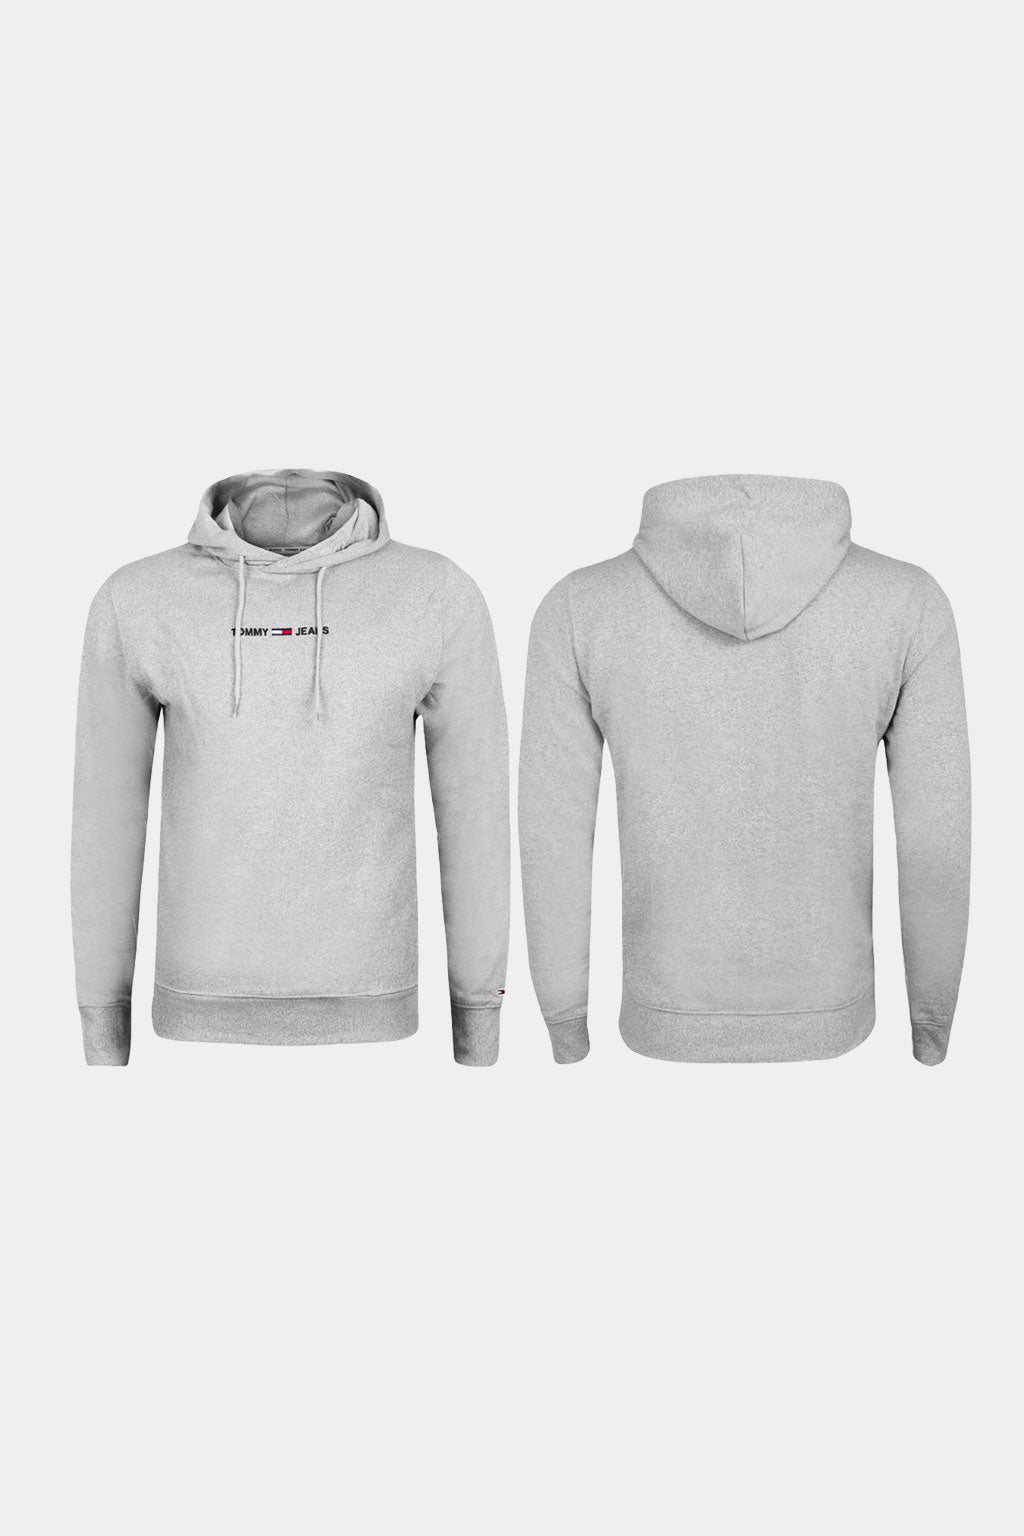 Tommy Hilfiger - Unisex Grey Hoodie With Chest Logo